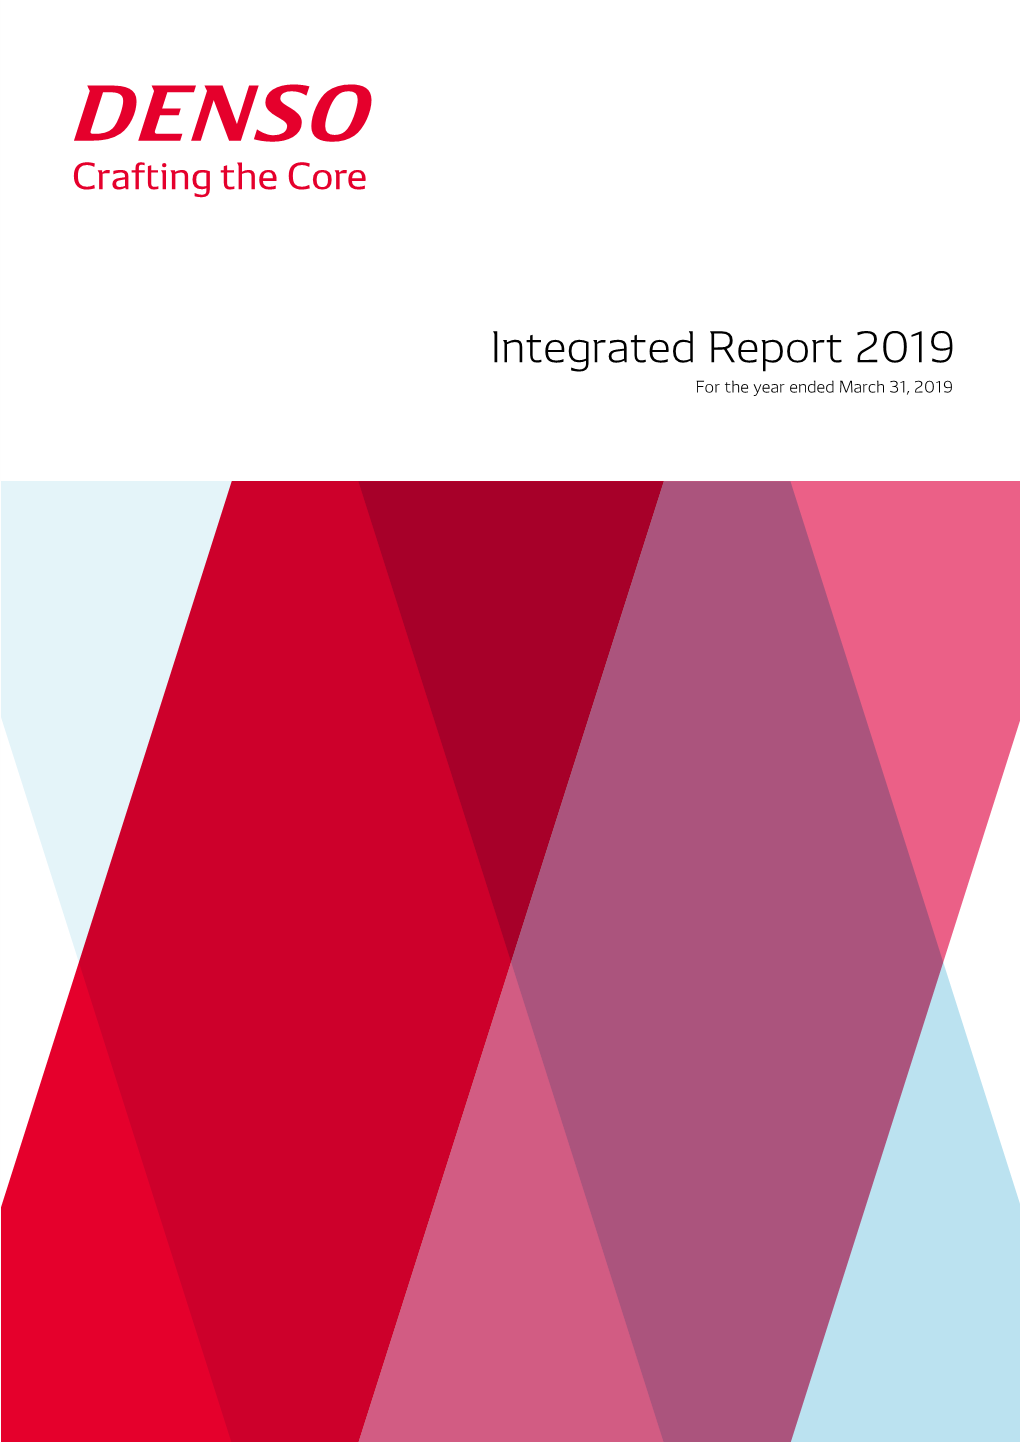 Integrated Report 2019 for the Year Ended March 31, 2019 the Year Ended March 31, for Integrated Report 2019 for the Year Ended March 31, 2019